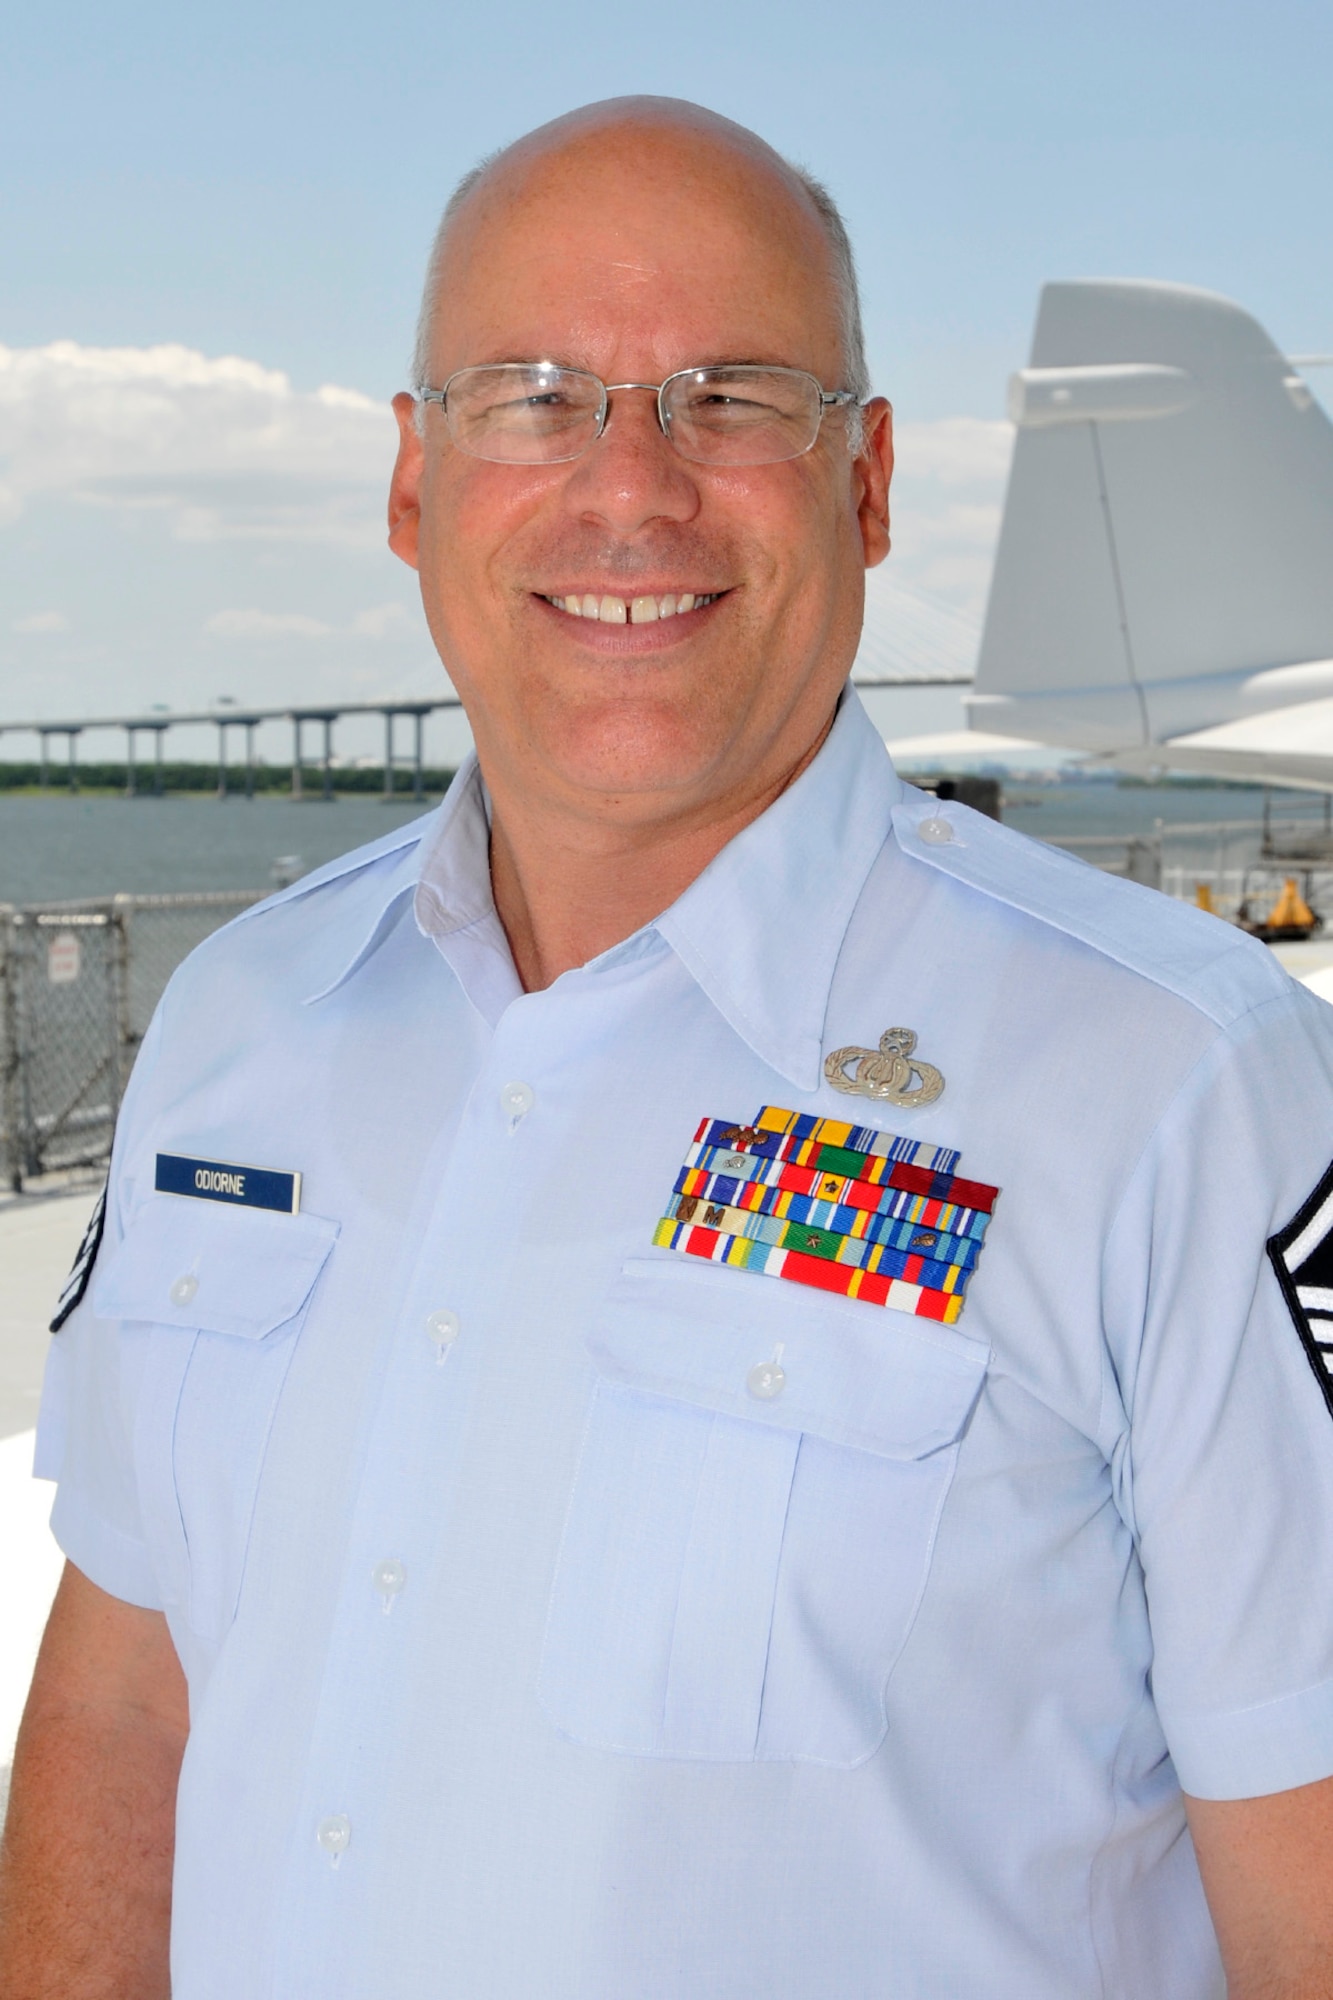 Master Sgt. Eric Odiorne, percussionist with the Air National Guard Band of the South, takes a minute to pose for a photo on the flight deck of the USS Yorktown, anchored in Mt. Pleasant, S.C., July 1, 2014. Odiorne performed the final concerts of his 24-year military career during the bands 2014 summer concert series. (U.S. Air National Guard photo by Senior Master Sgt. Paul Mann/Released)